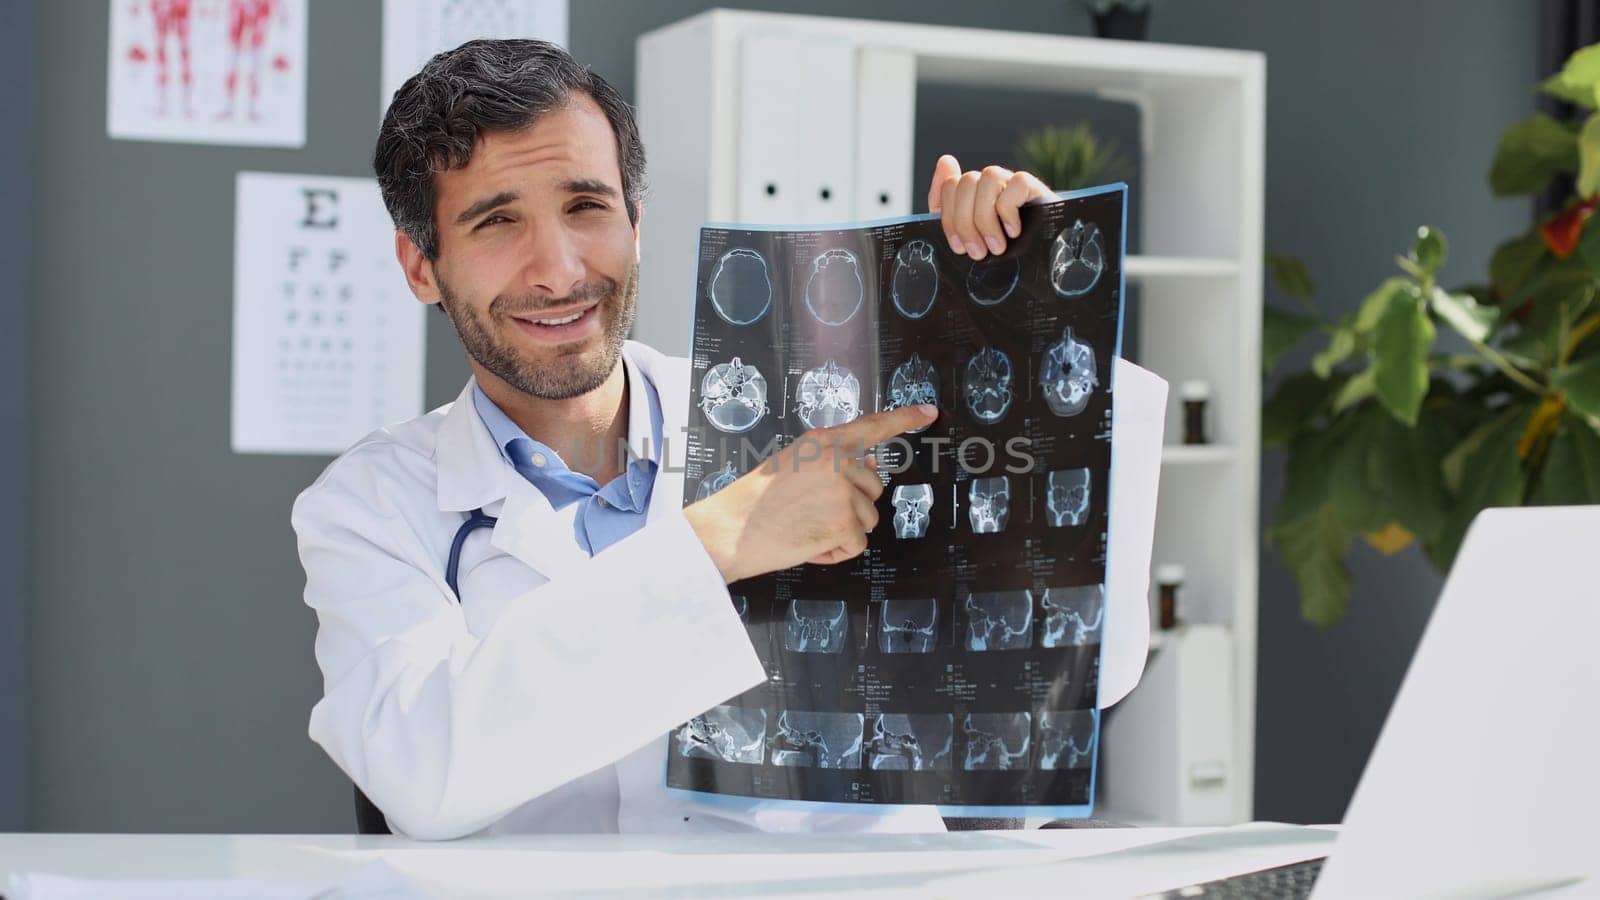 Image of male doctor looking at x-ray results by Prosto